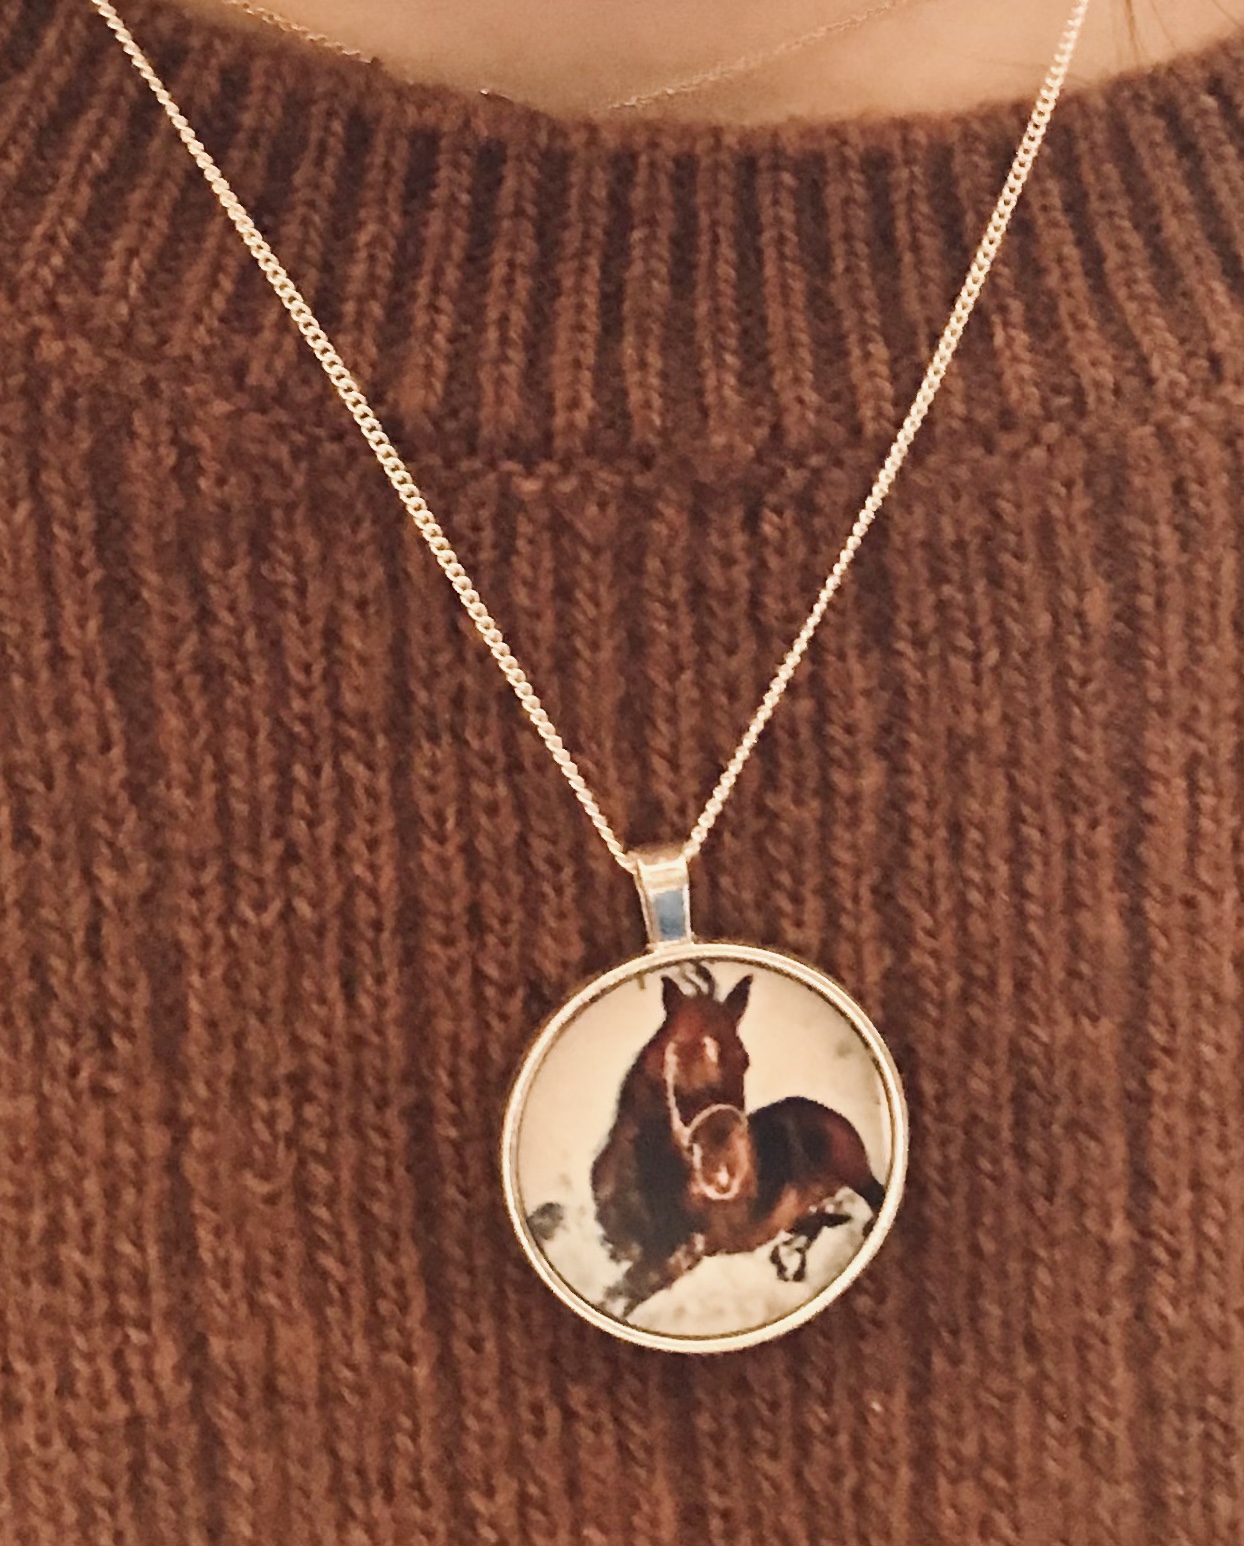 Horsing around in the snow necklace